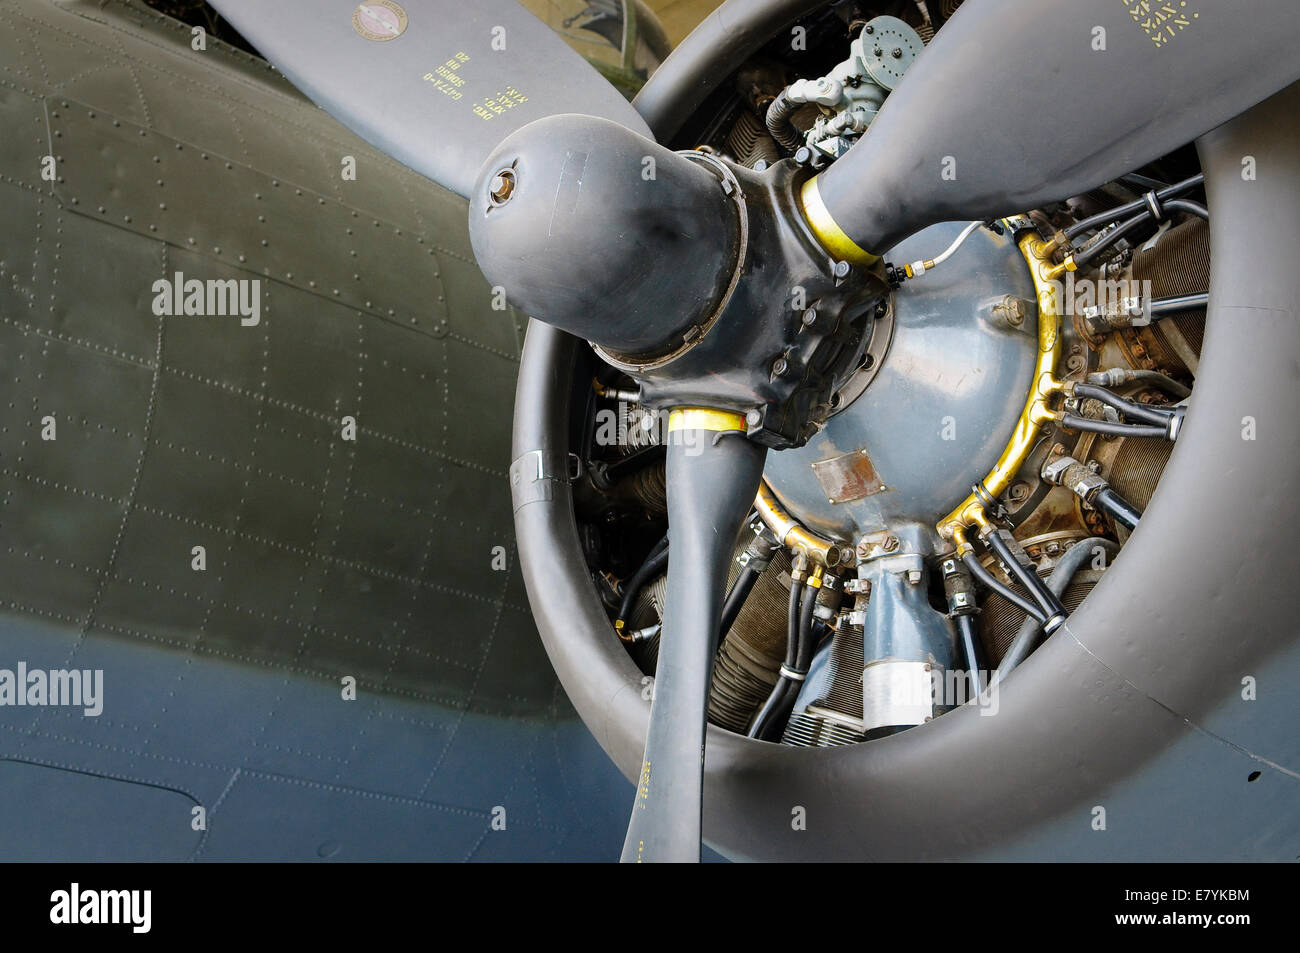 Boening B17 Flying Fortress aircraft engine. Stock Photo